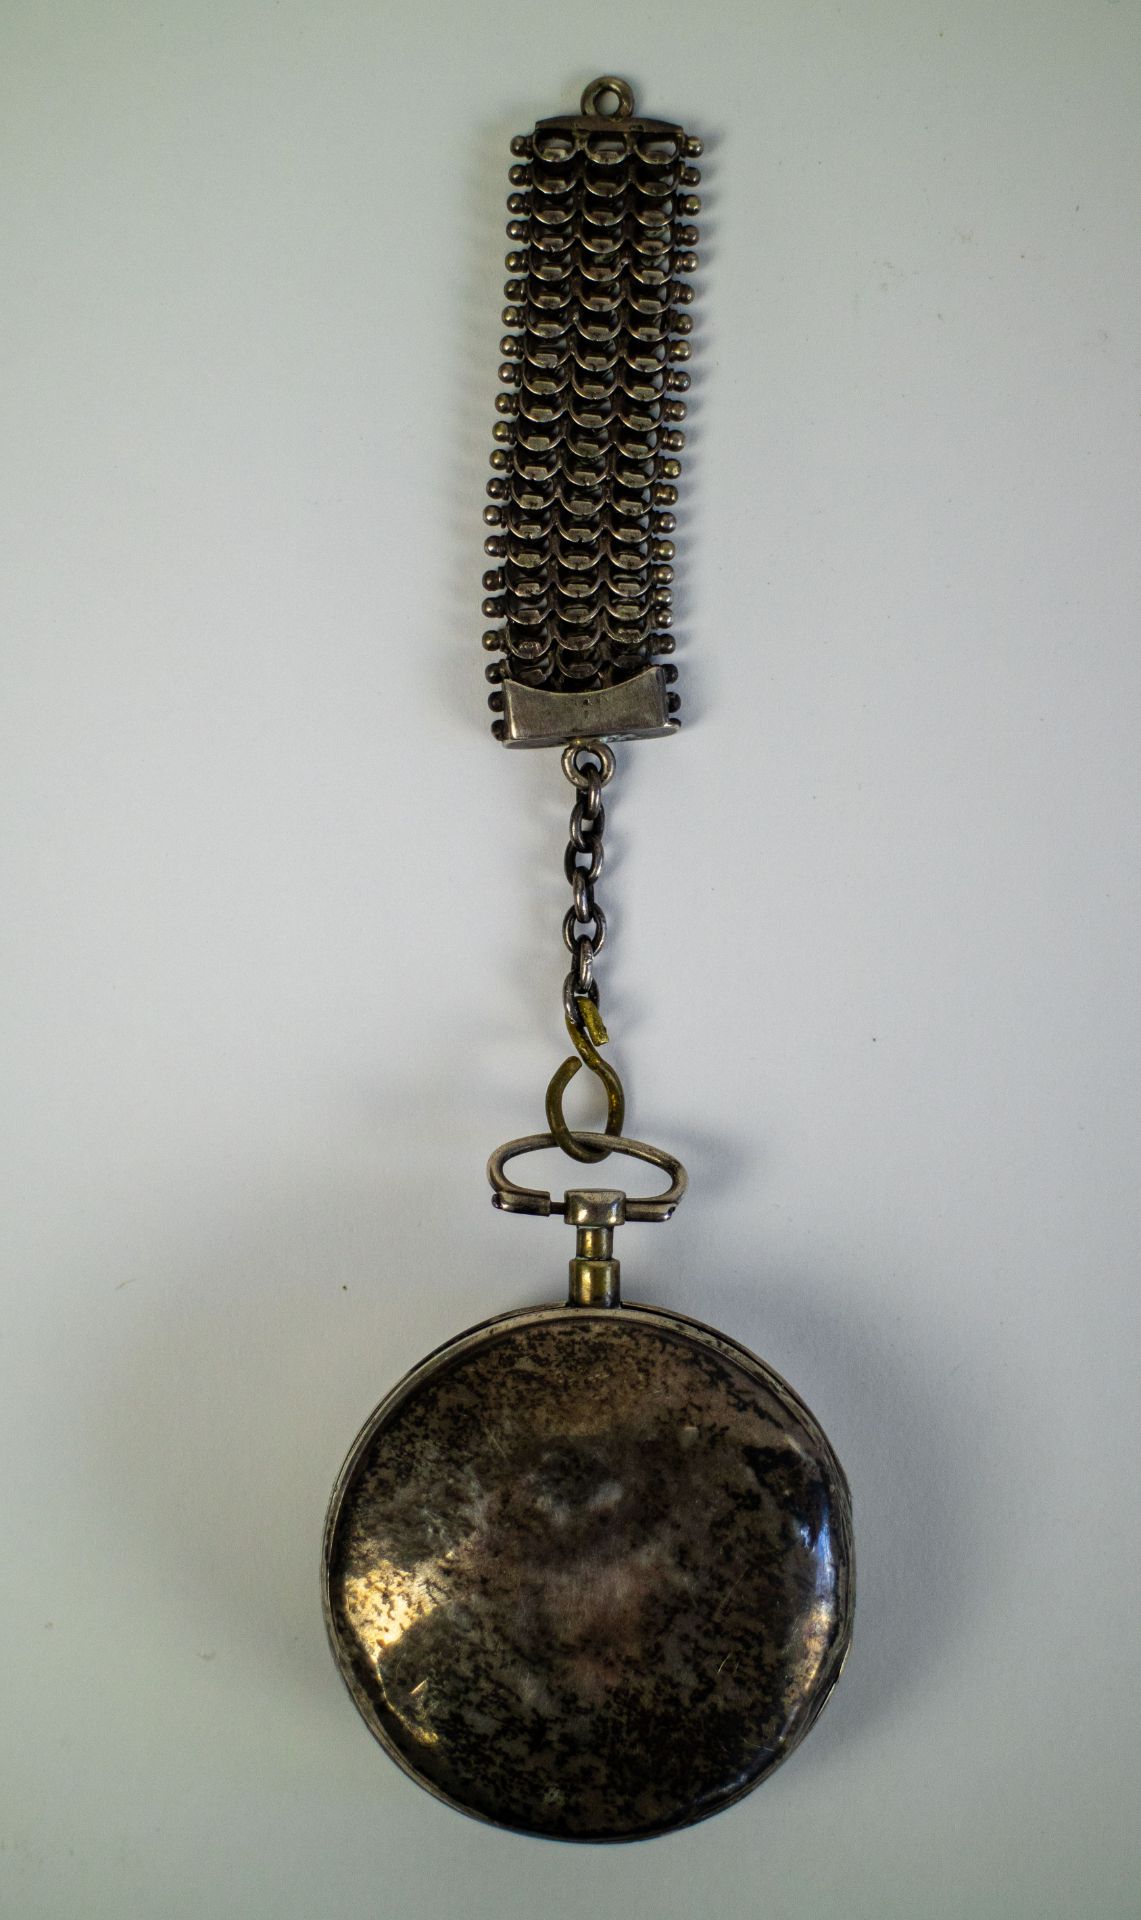 Brequet pocket watch - Image 3 of 3